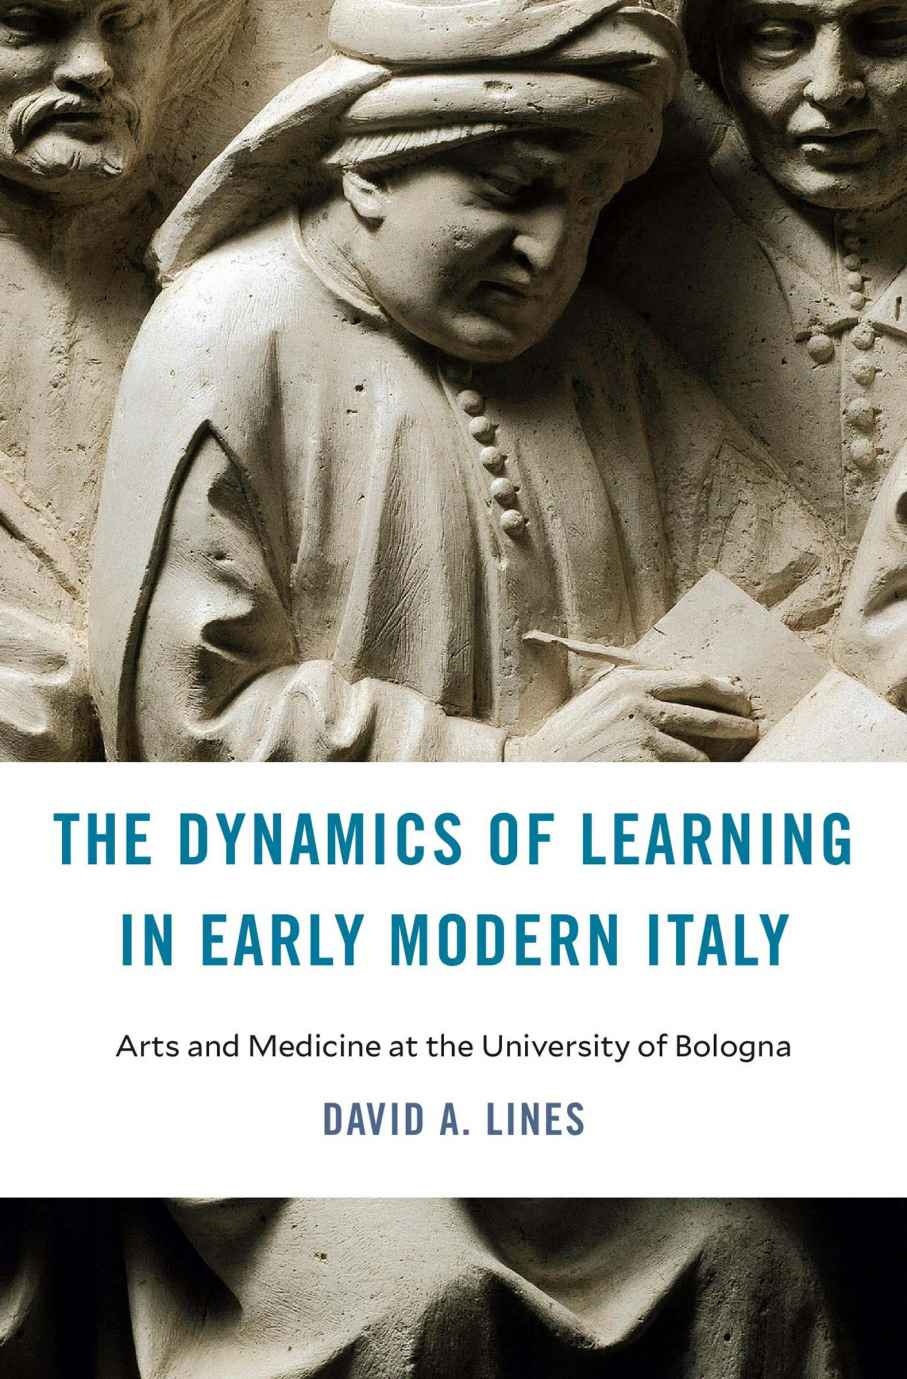 The Dynamics of Learning in Early Modern Italy: Arts and Medicine at the University of Bologna